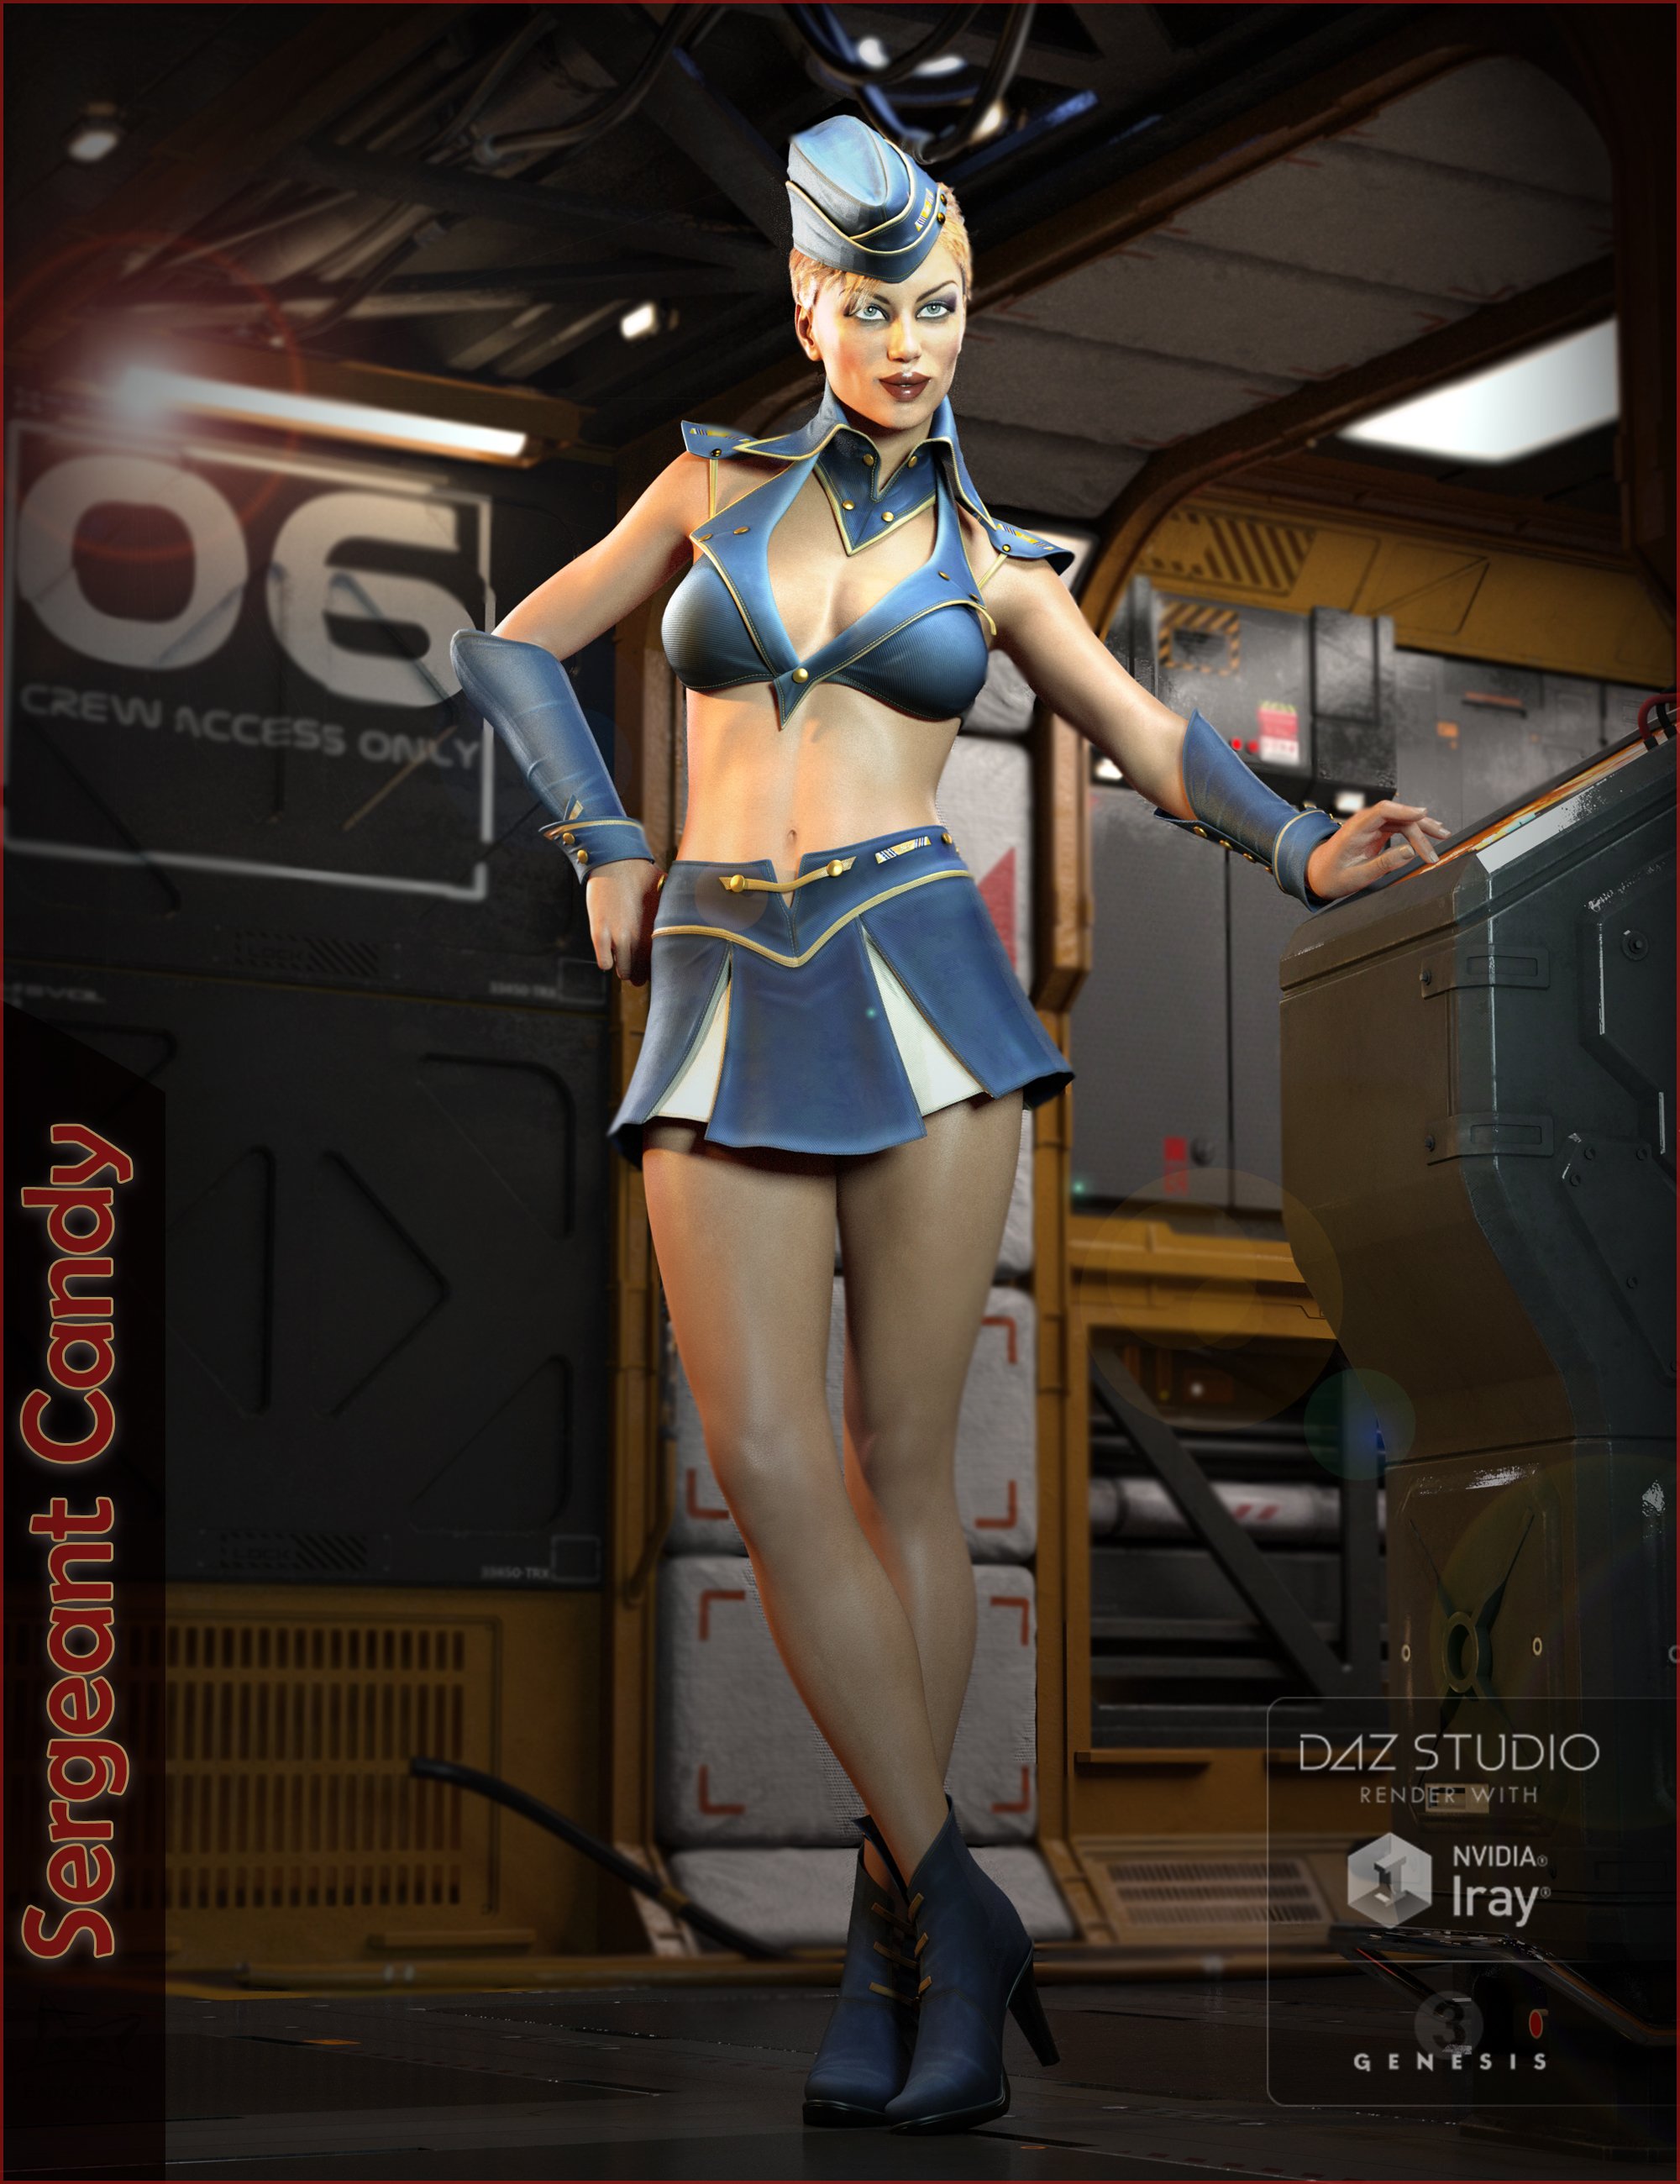 Sergeant Candy Outfit for Genesis 3 Female(s) by: BadKitteh Co, 3D Models by Daz 3D